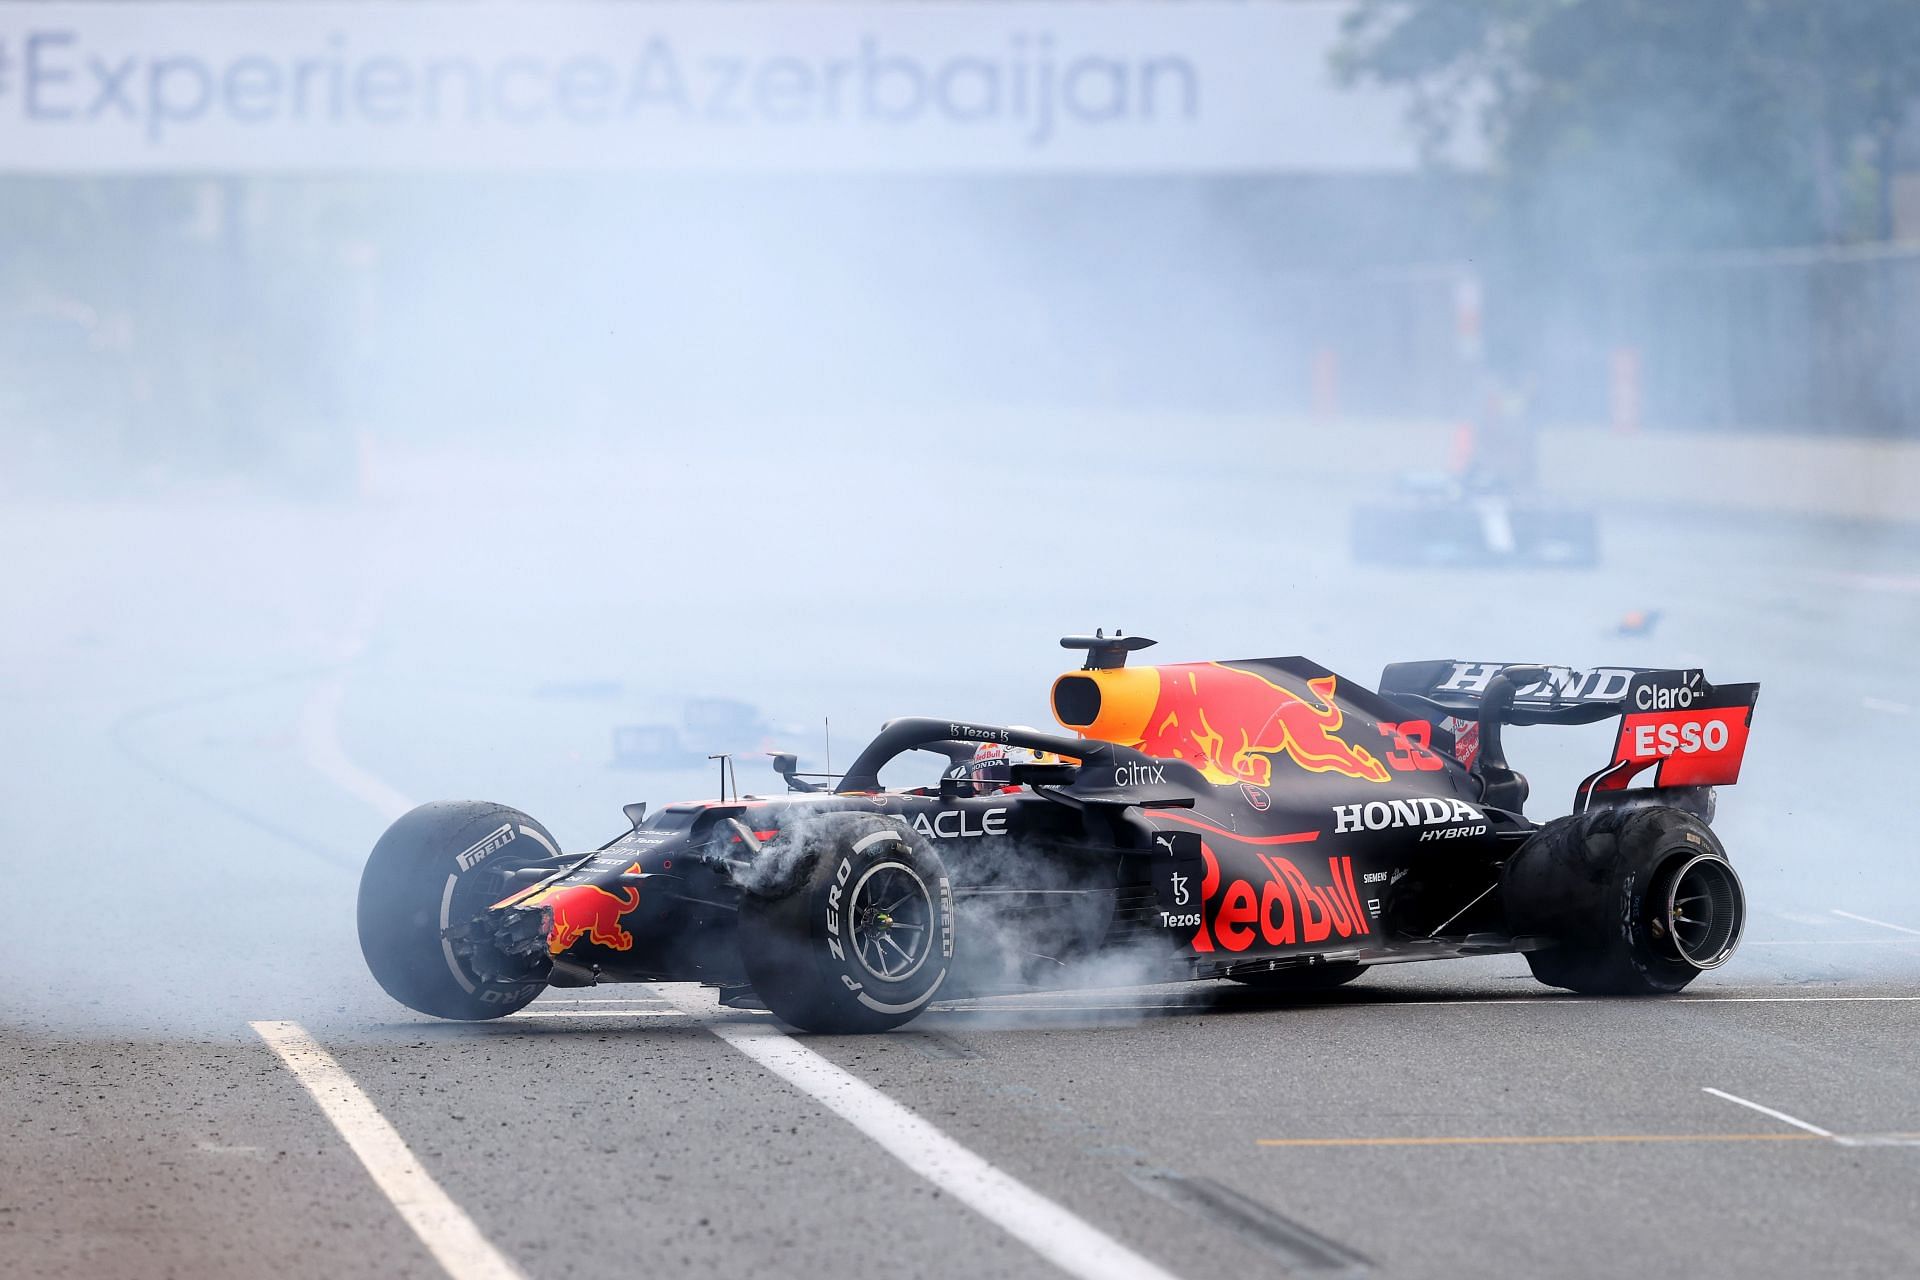 Max Verstappen crashes out at the Grand Prix of Azerbaijan